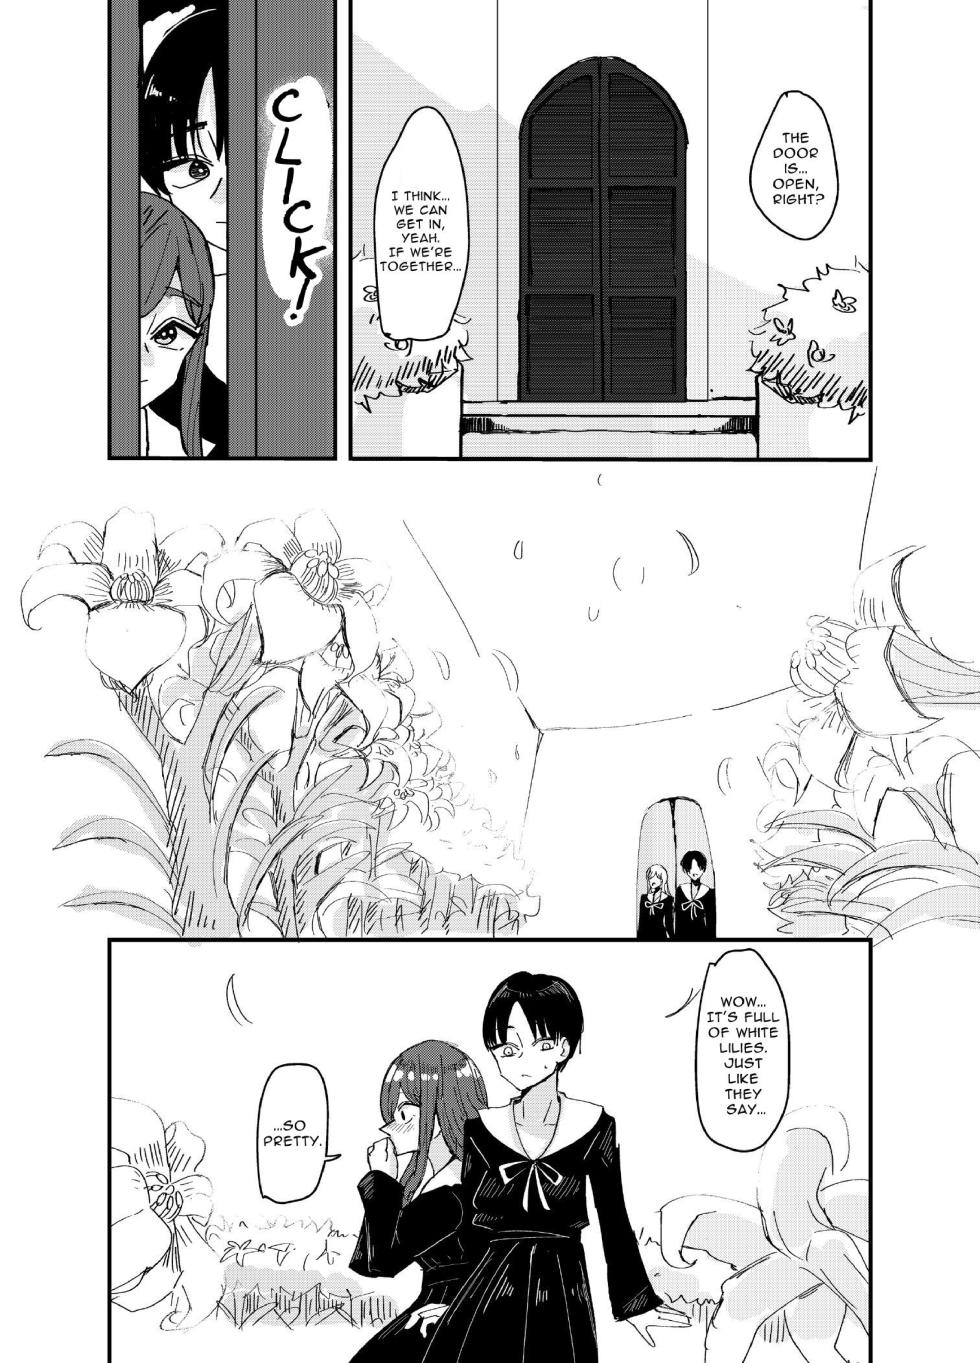 [Aweida] White Lilies Blossom, and Then We Kiss [English] [StainedGlassKnight] - Page 8